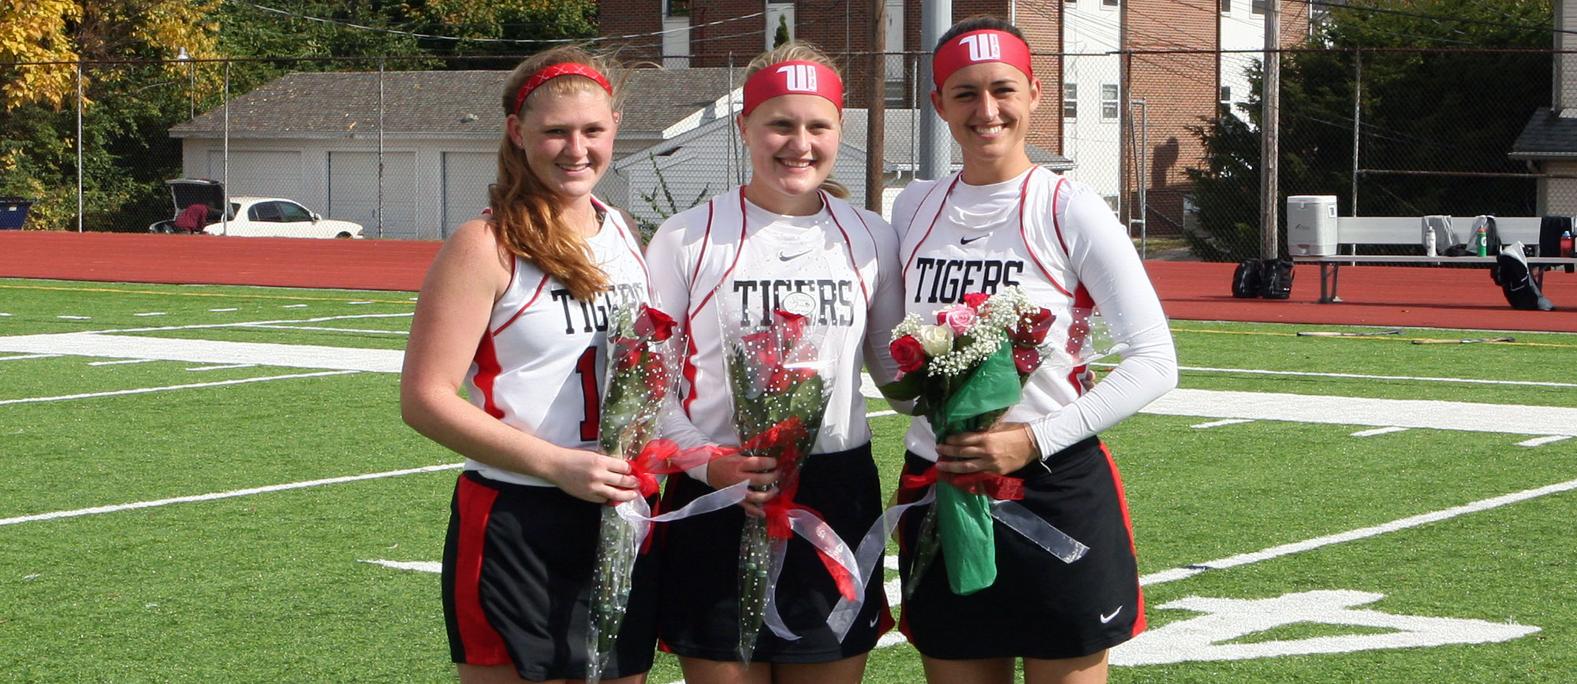 (From left) Seniors Emma Foster, Andrea Mattingly and Paige Vanerstrom before a 4-1 win over Oberlin. Photo by Hannah Yalaz